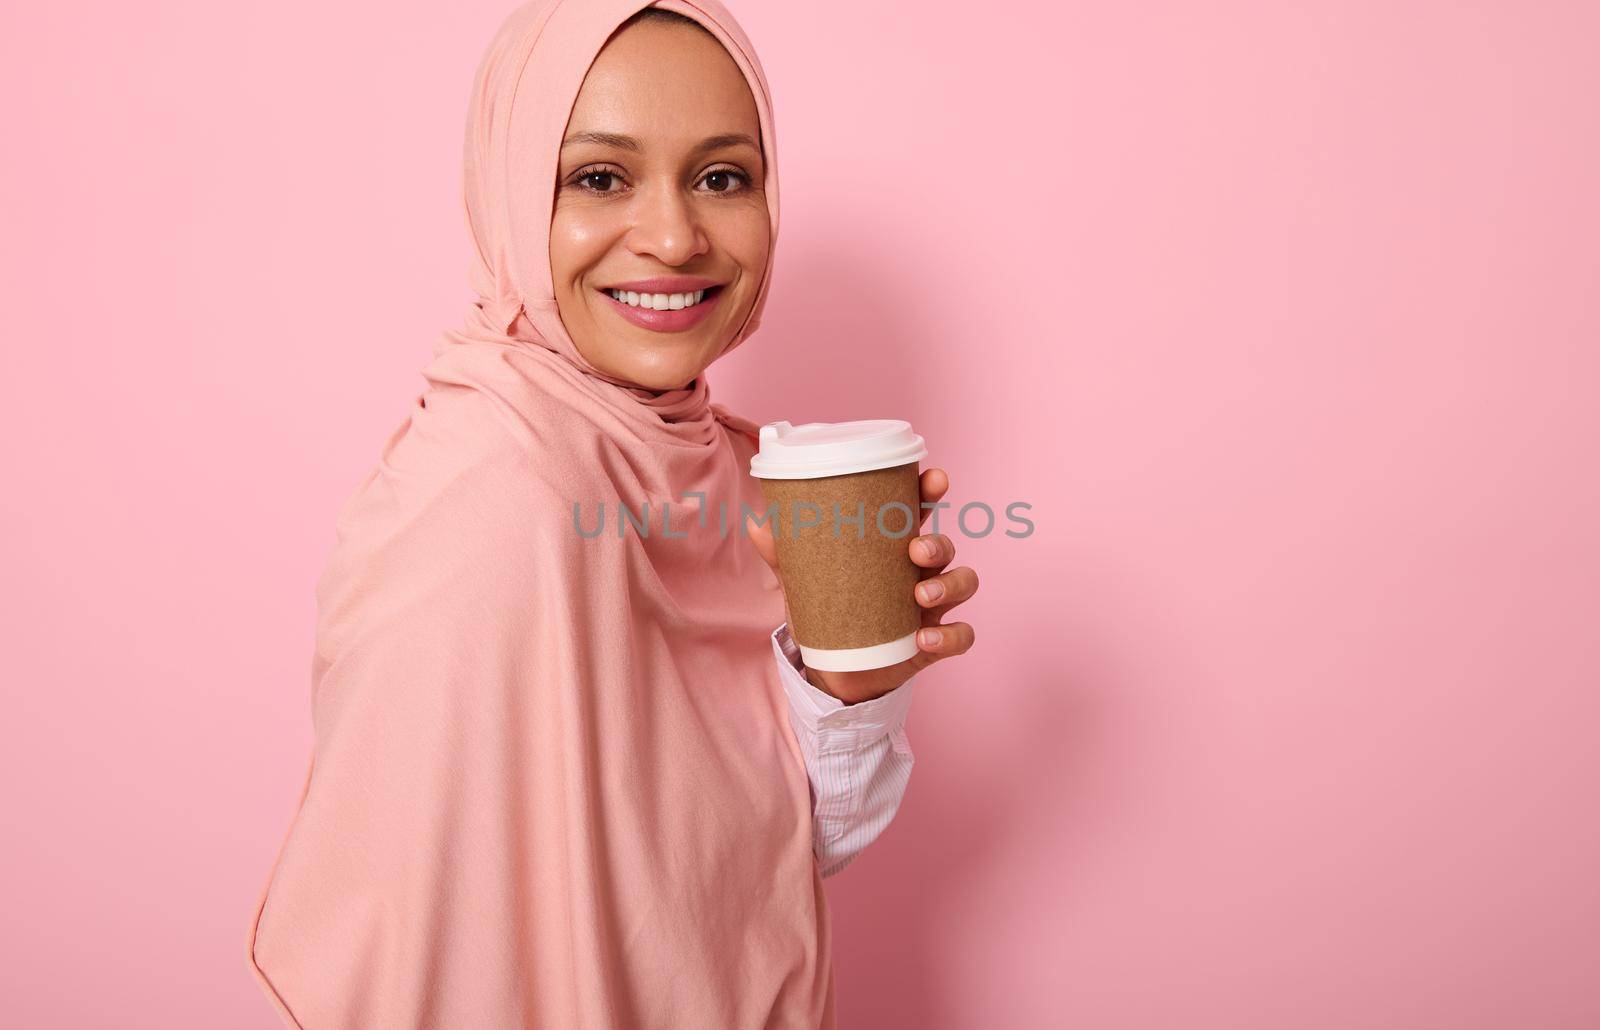 Close-up. Muslim Arabic woman with covered head in hijab holds disposable cardboard takeaway cup, smiles toothy smile, looking at camera, standing three quarters against colored background, copy space